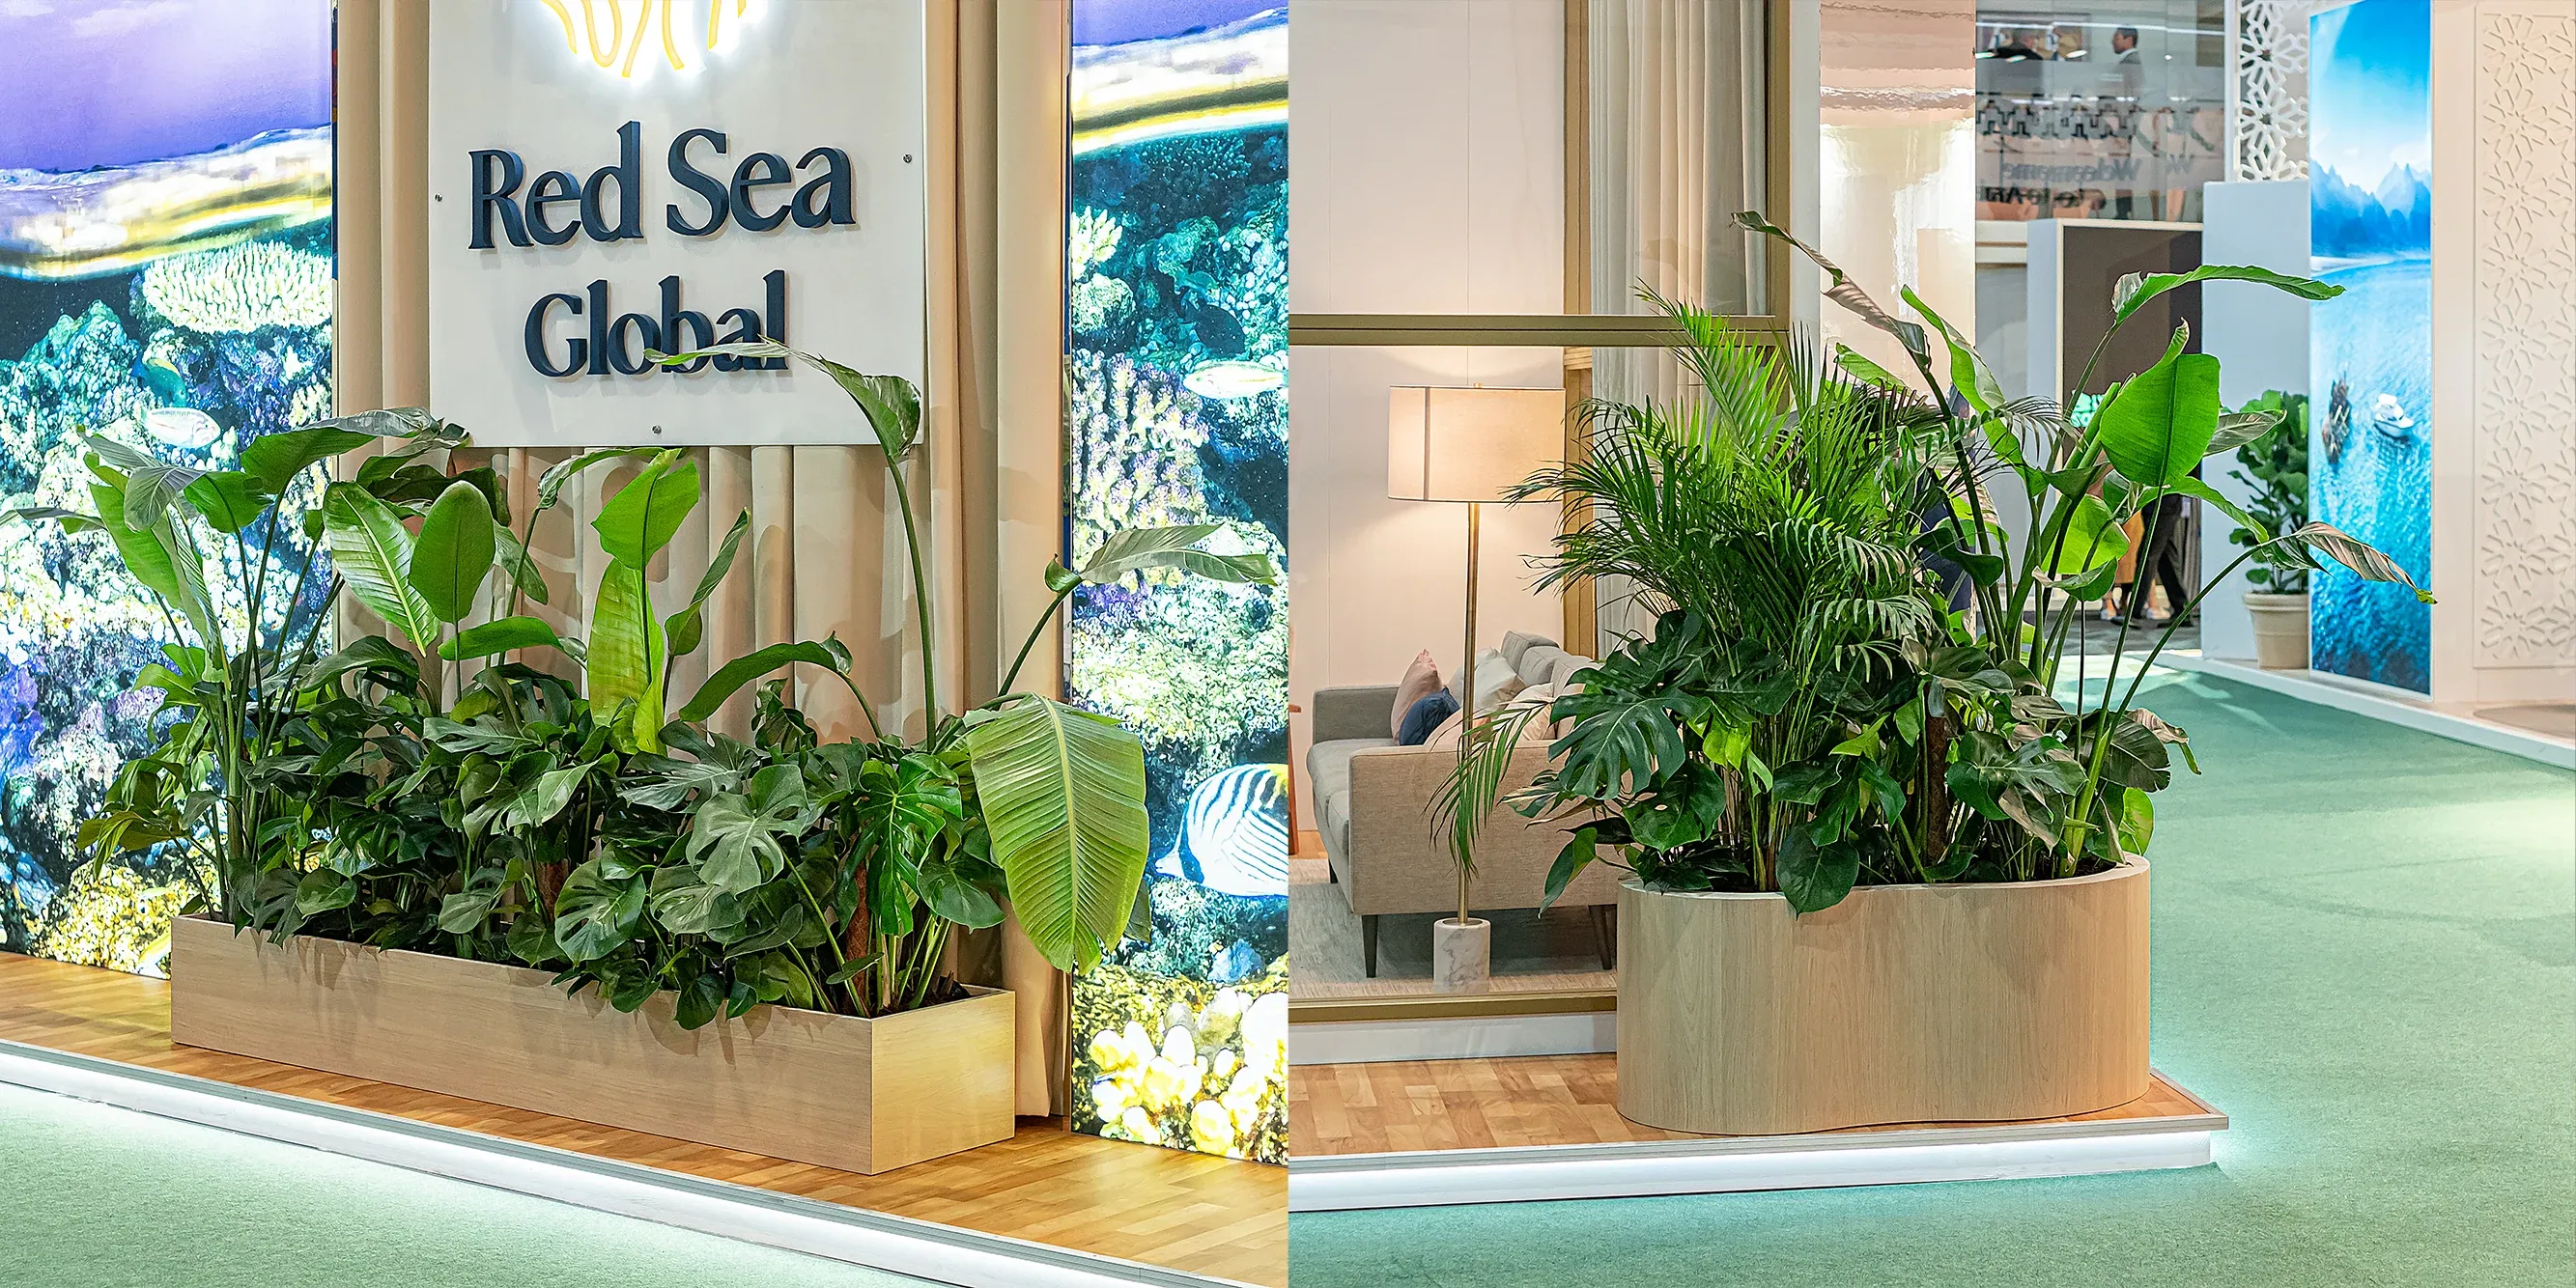 Event florist Amaranté London partnered with Red Sea Global to provide them with plants for hire for a corporate event